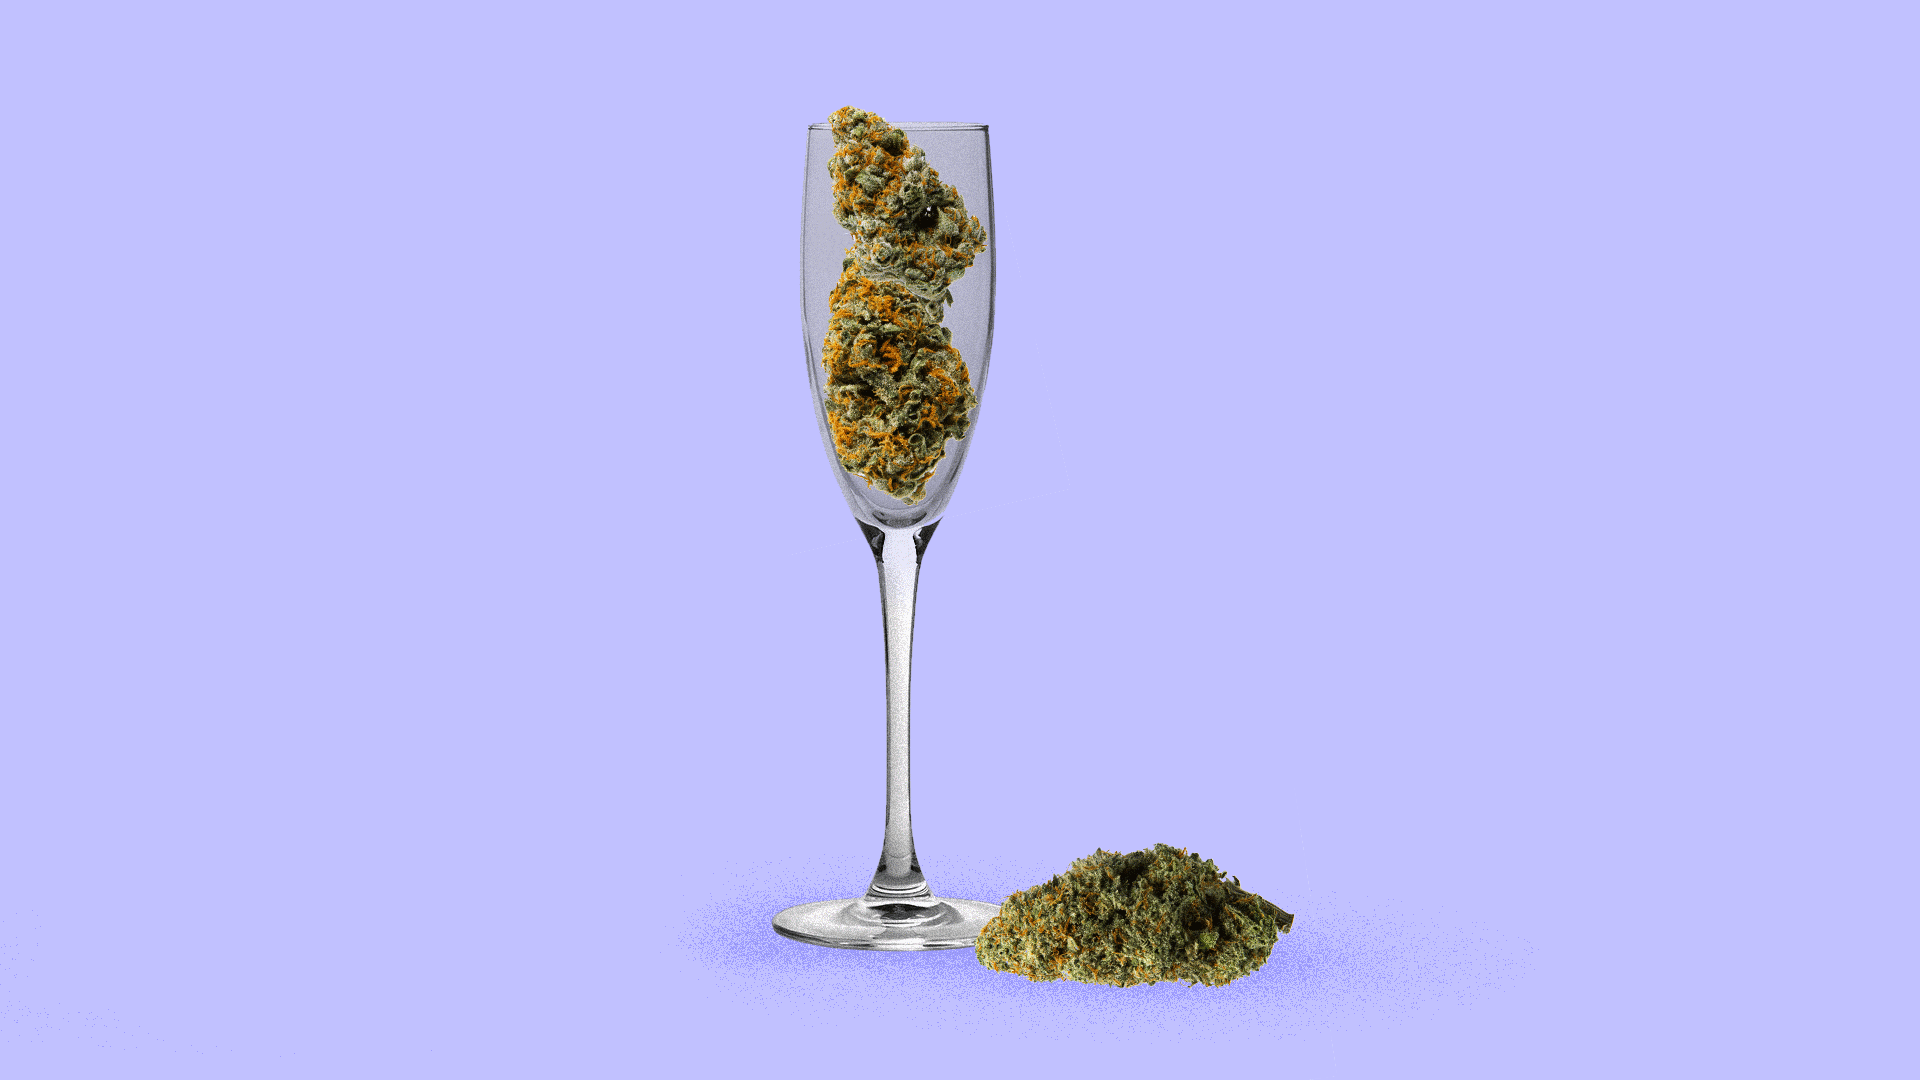 Illustration of marijuana buds in a champagne flute.